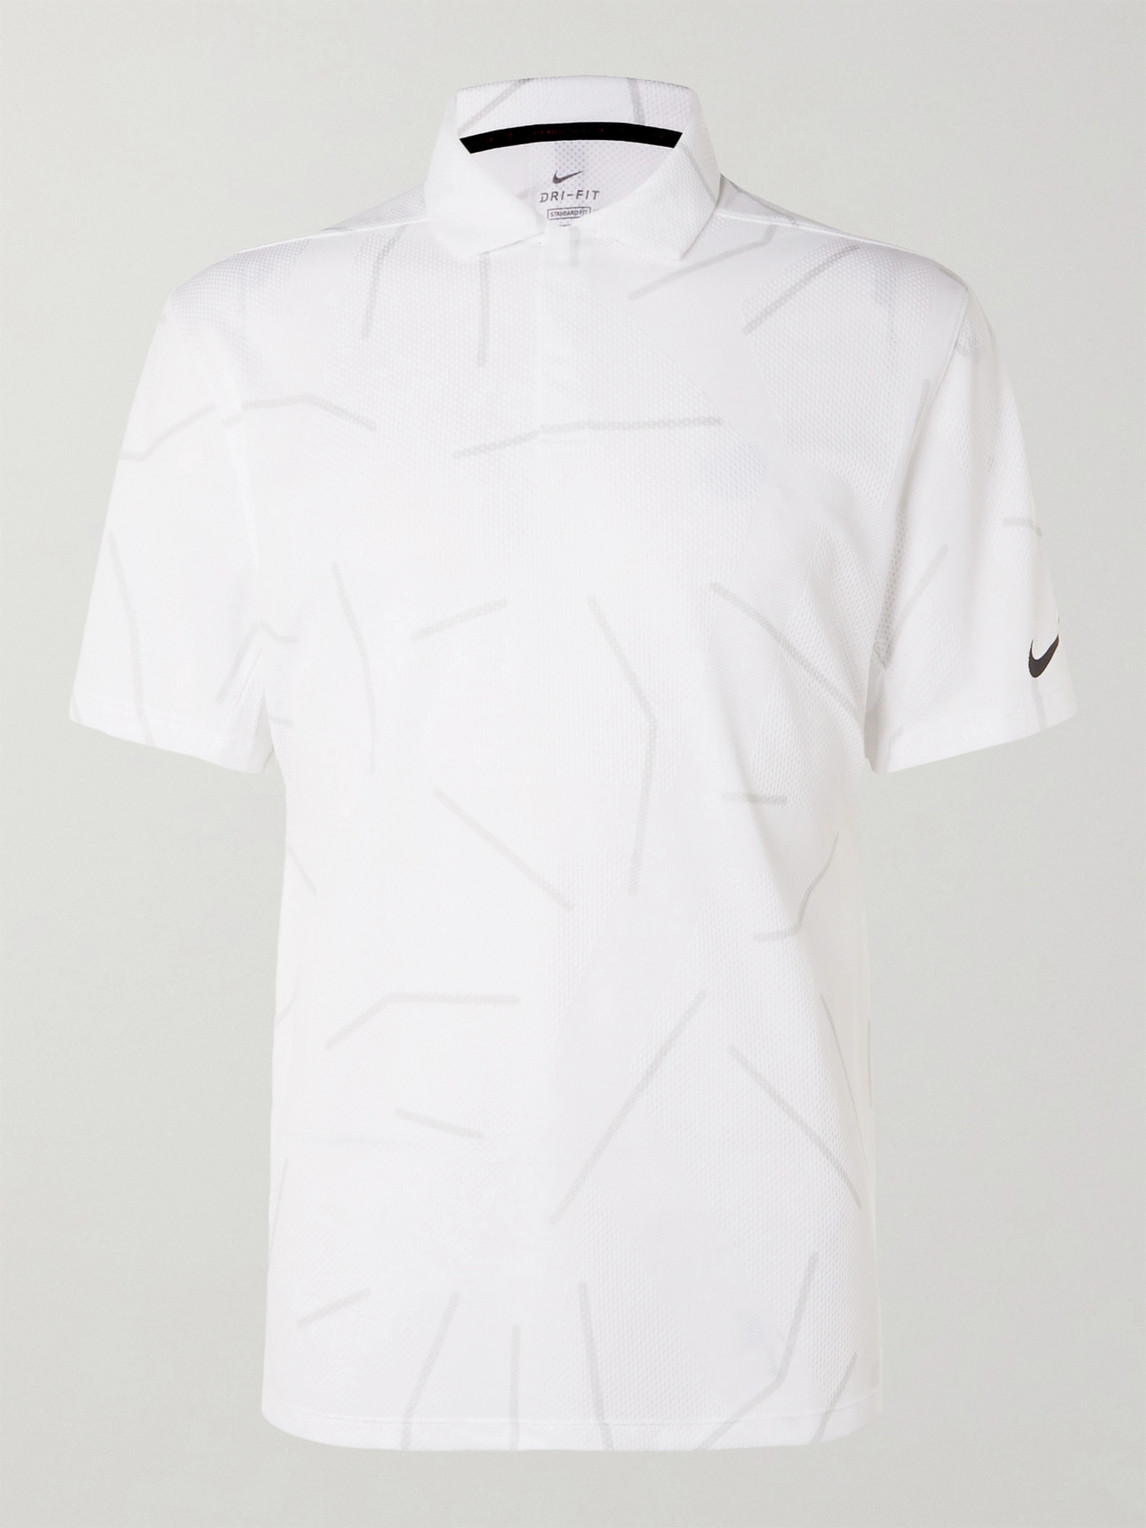 Nike Dry Course Printed Dri-fit Jacquard Golf Polo Shirt In White